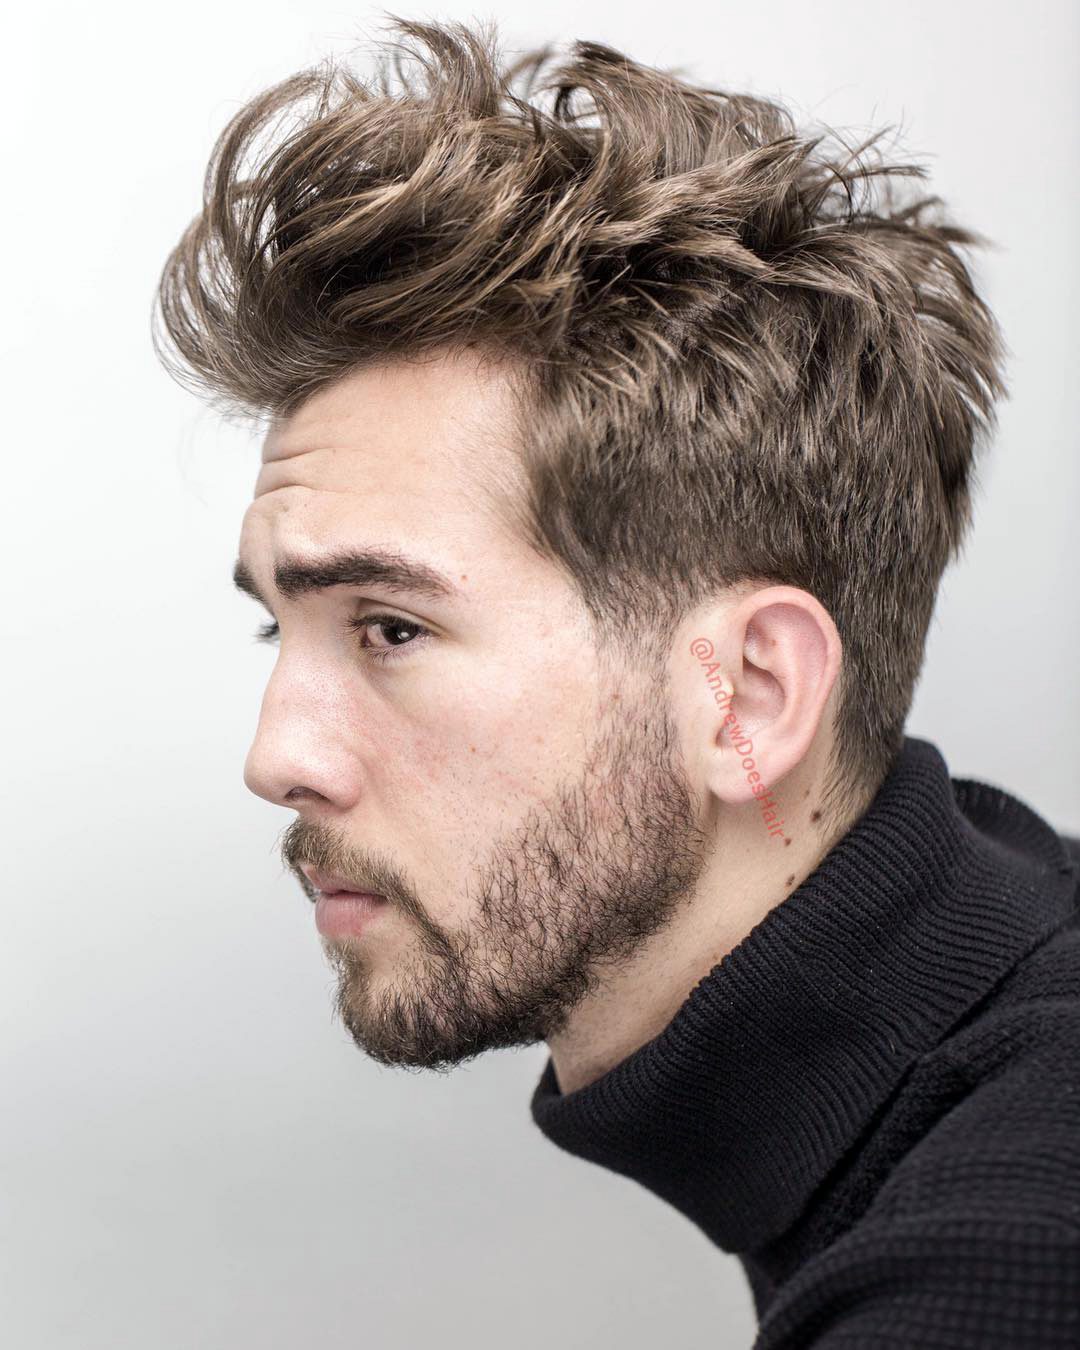 Tousled Top with Low Volume Sides